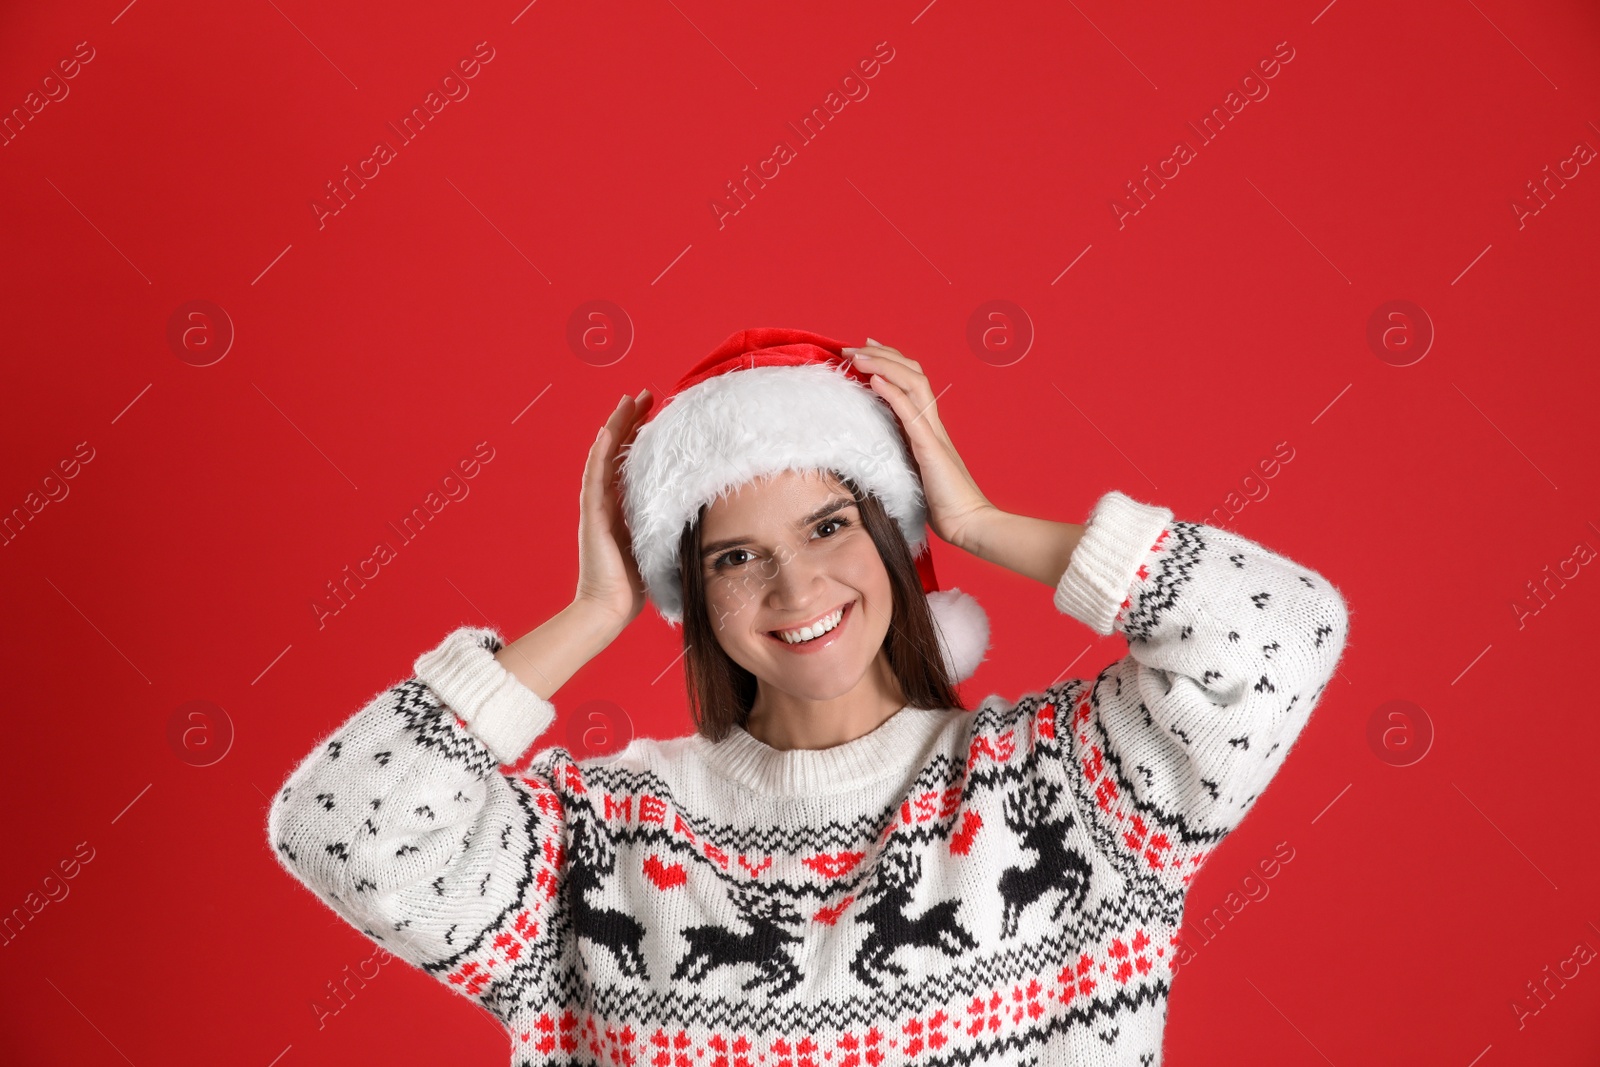 Photo of Pretty woman in Santa hat and Christmas sweater on red background